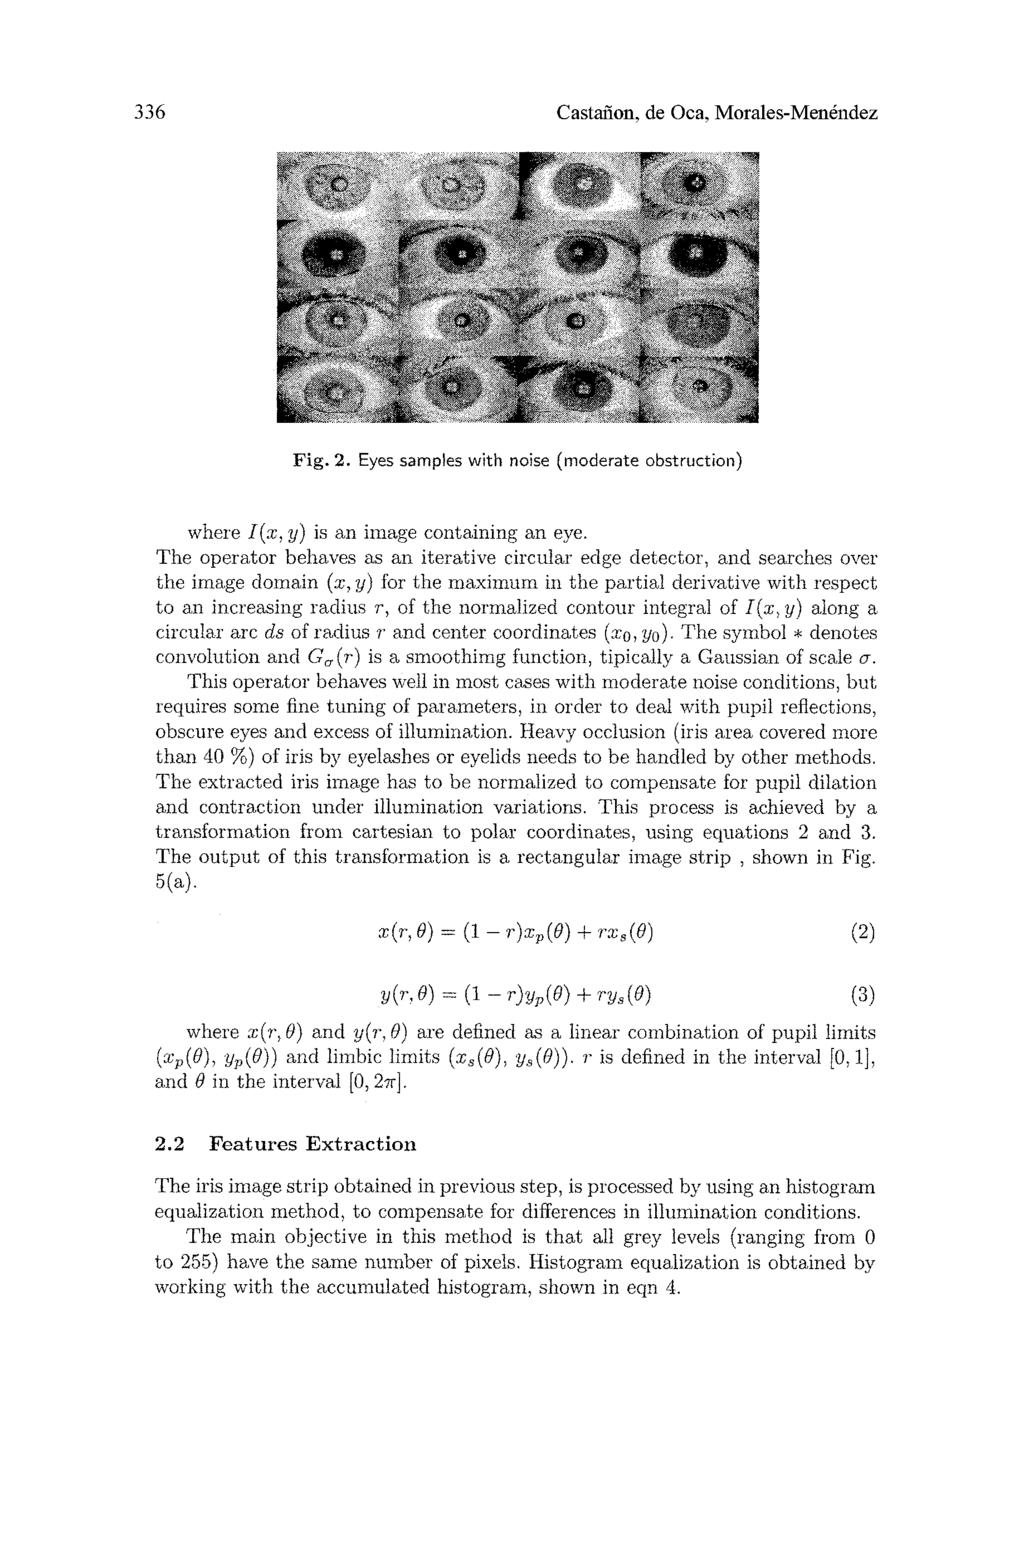 336 Castanon, de Oca, Morales-Menendez I^V k r A A k J Fig. 2. Eyes samples with noise (moderate obstruction) where I{x, y) is an image containing an eye.